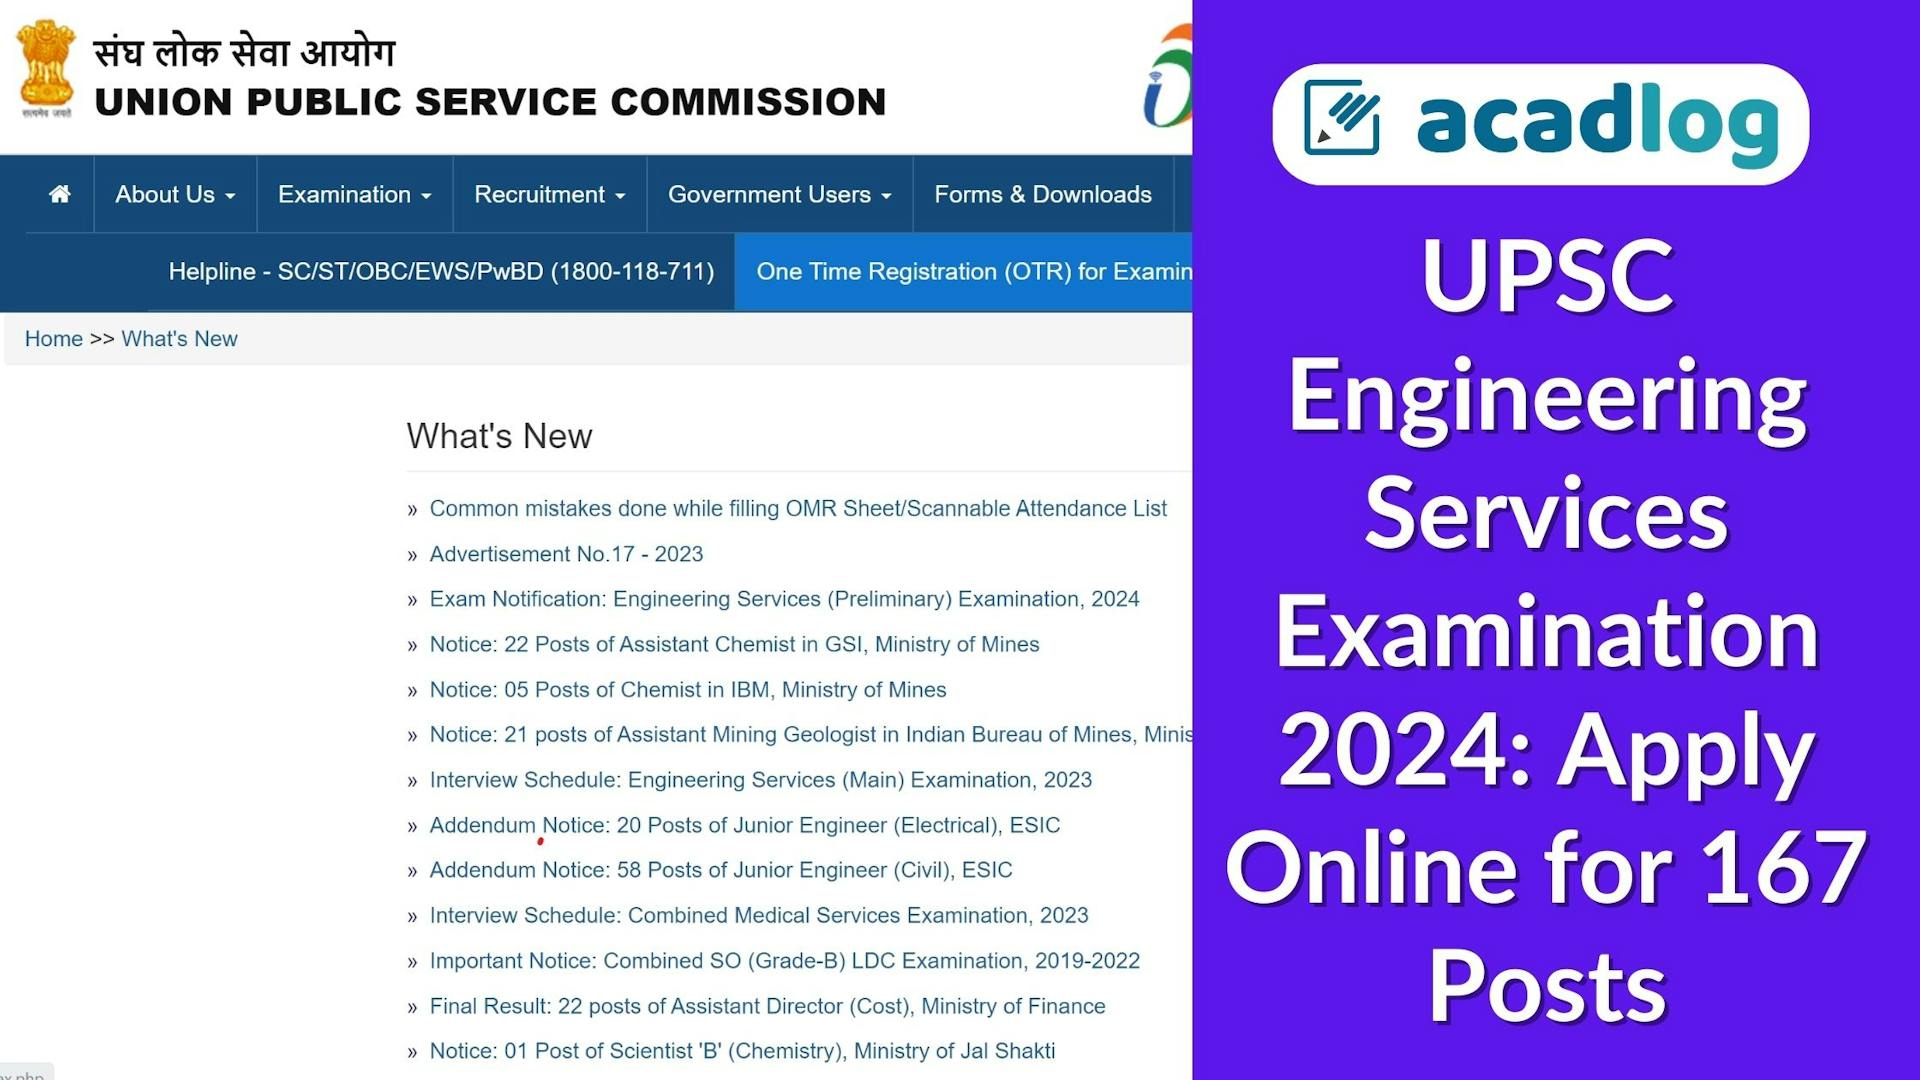 Acadlog: UPSC Engineering Services Examination 2024 Apply Online for 167 Post